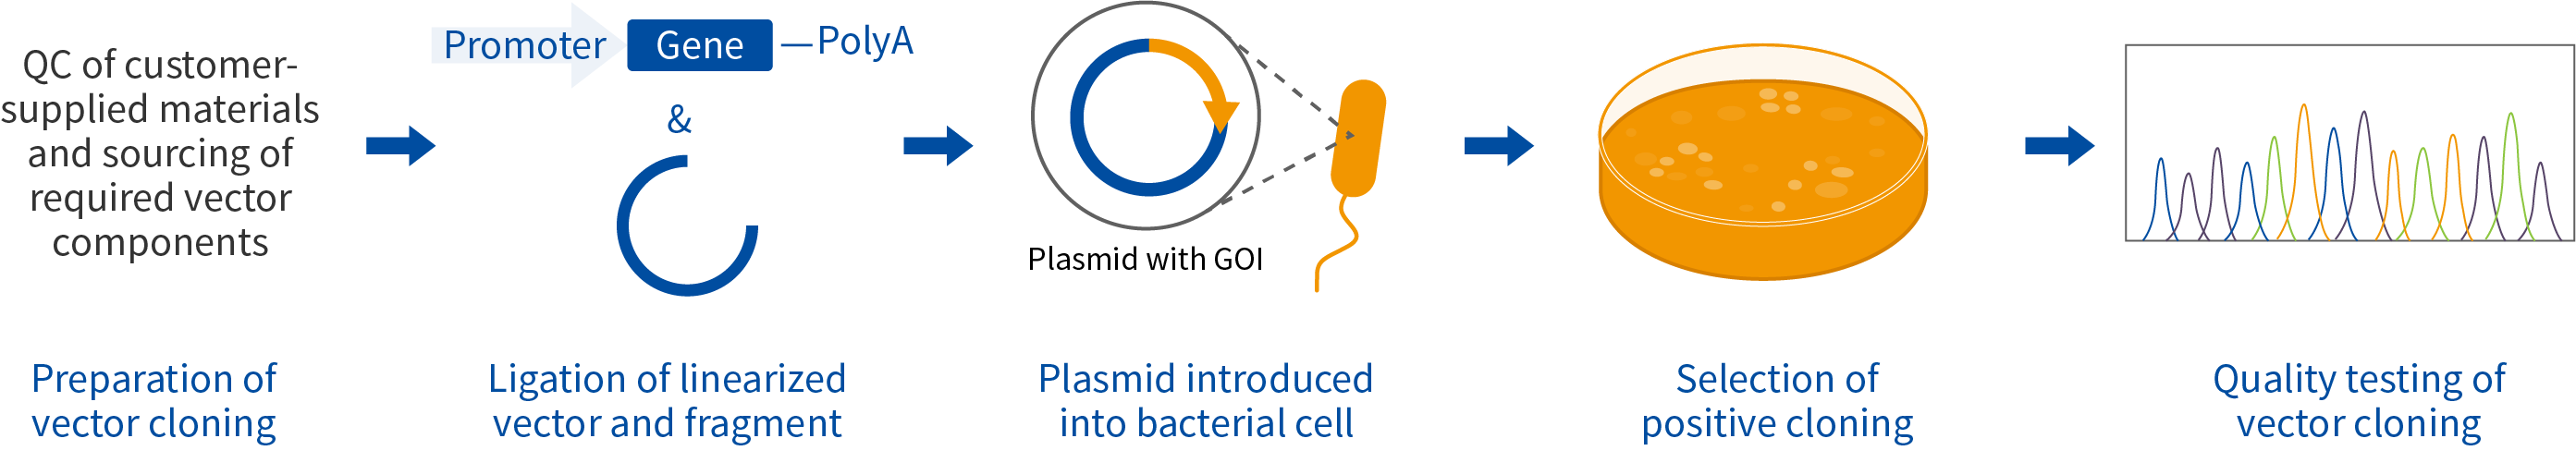 A diagram showing the stages of a cell culture process.